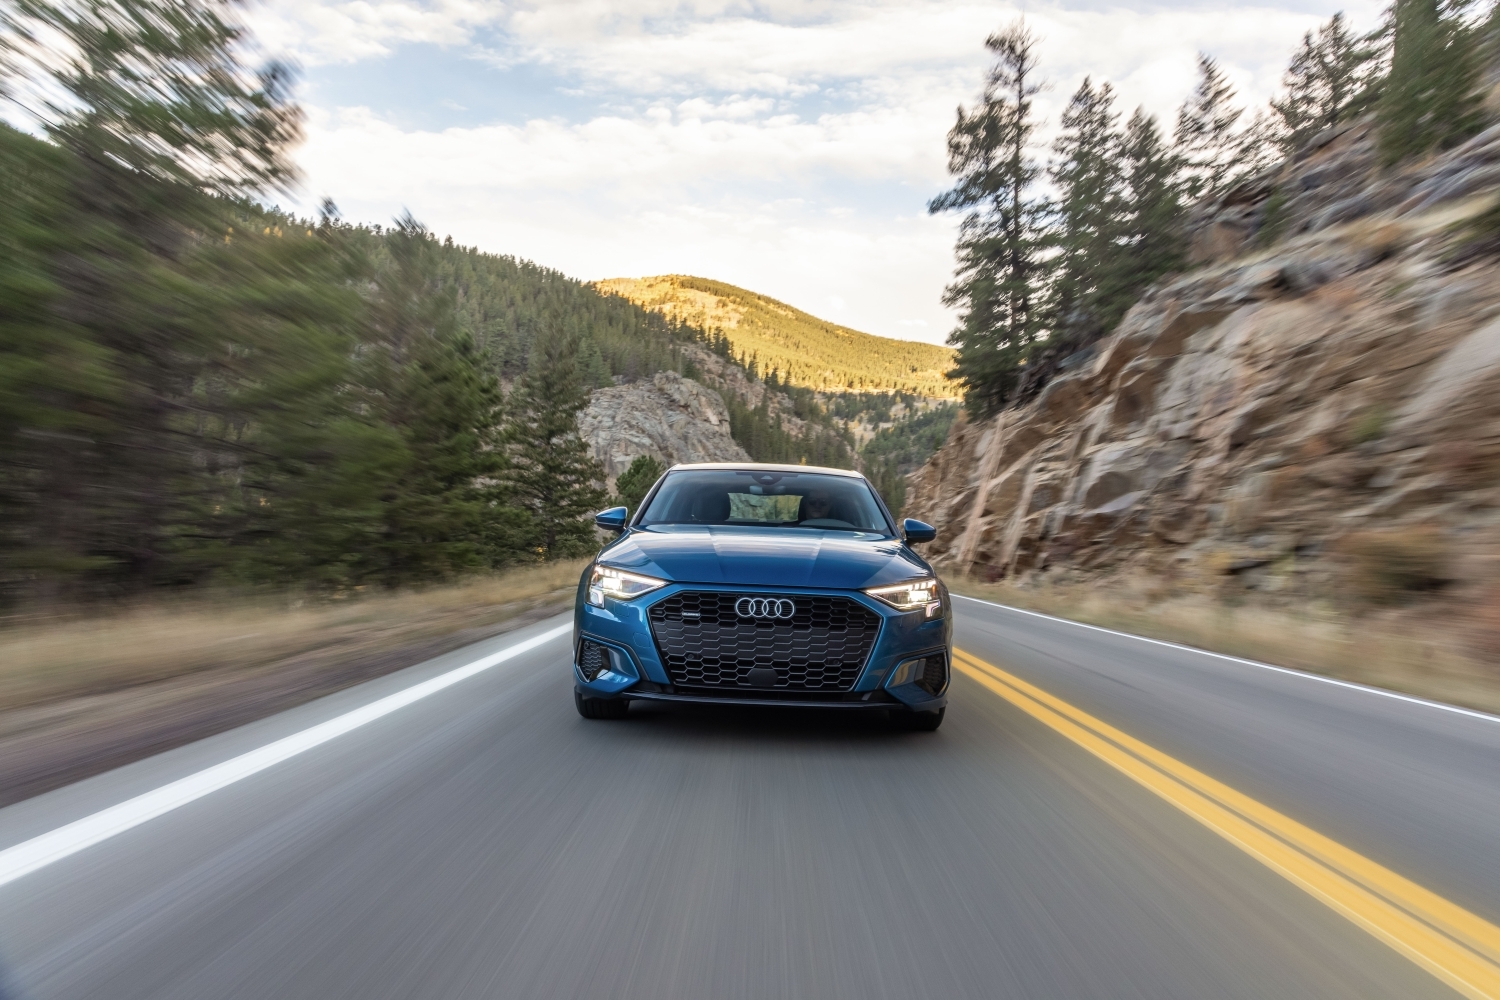 Front view of a blue 2022 Audi A3 sedan driving in the mountains; action shot, it's moving fast along a paved road